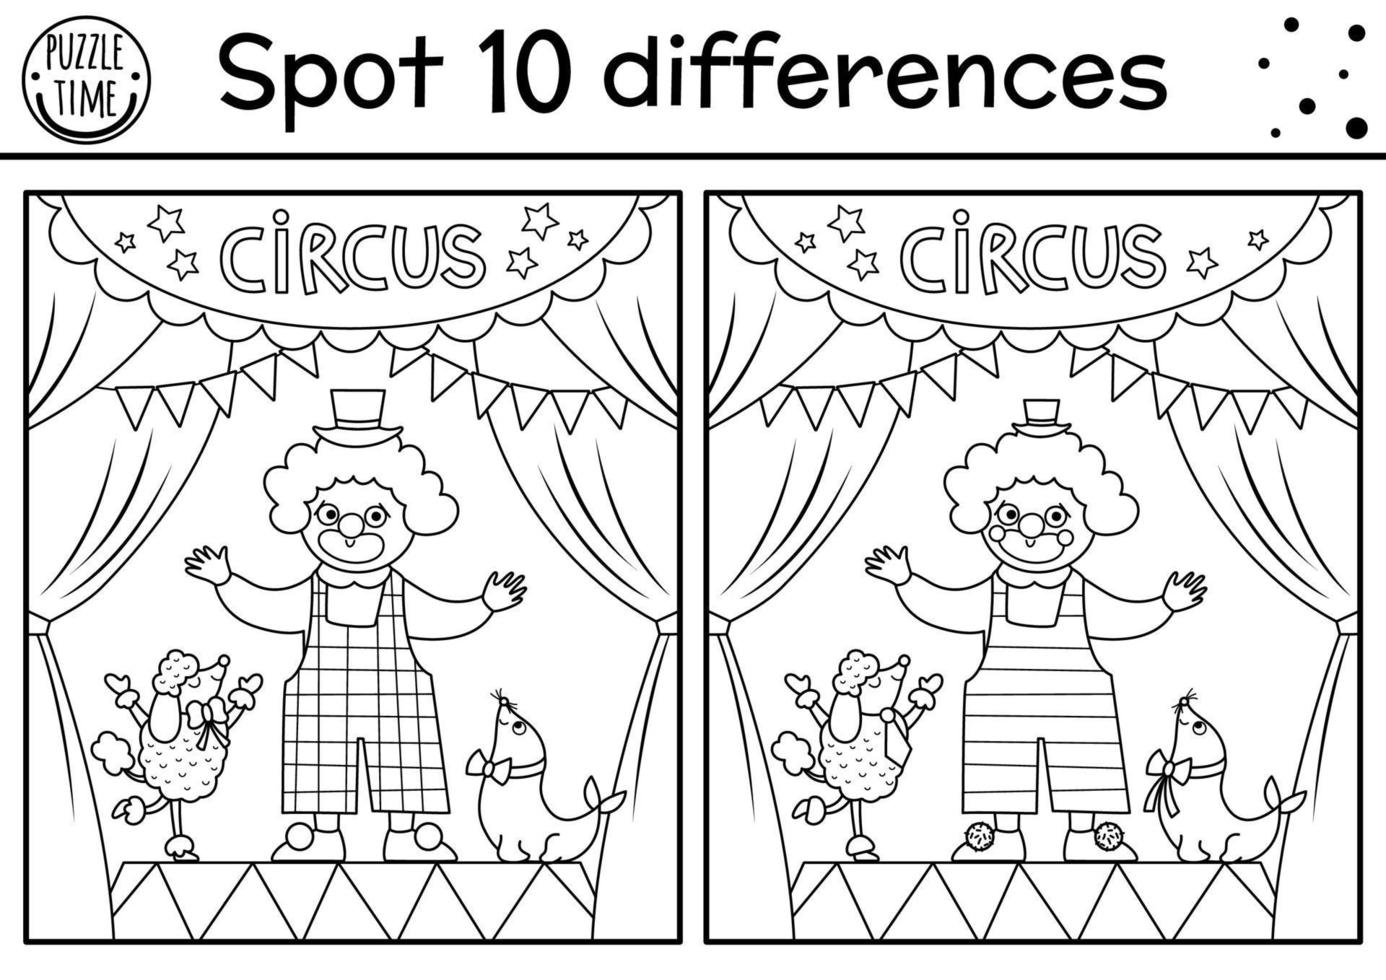 Circus black and white find differences game. Educational activity with cute clown, animals on stage. Amusement show line puzzle for kids with funny artist. Festival printable coloring page vector